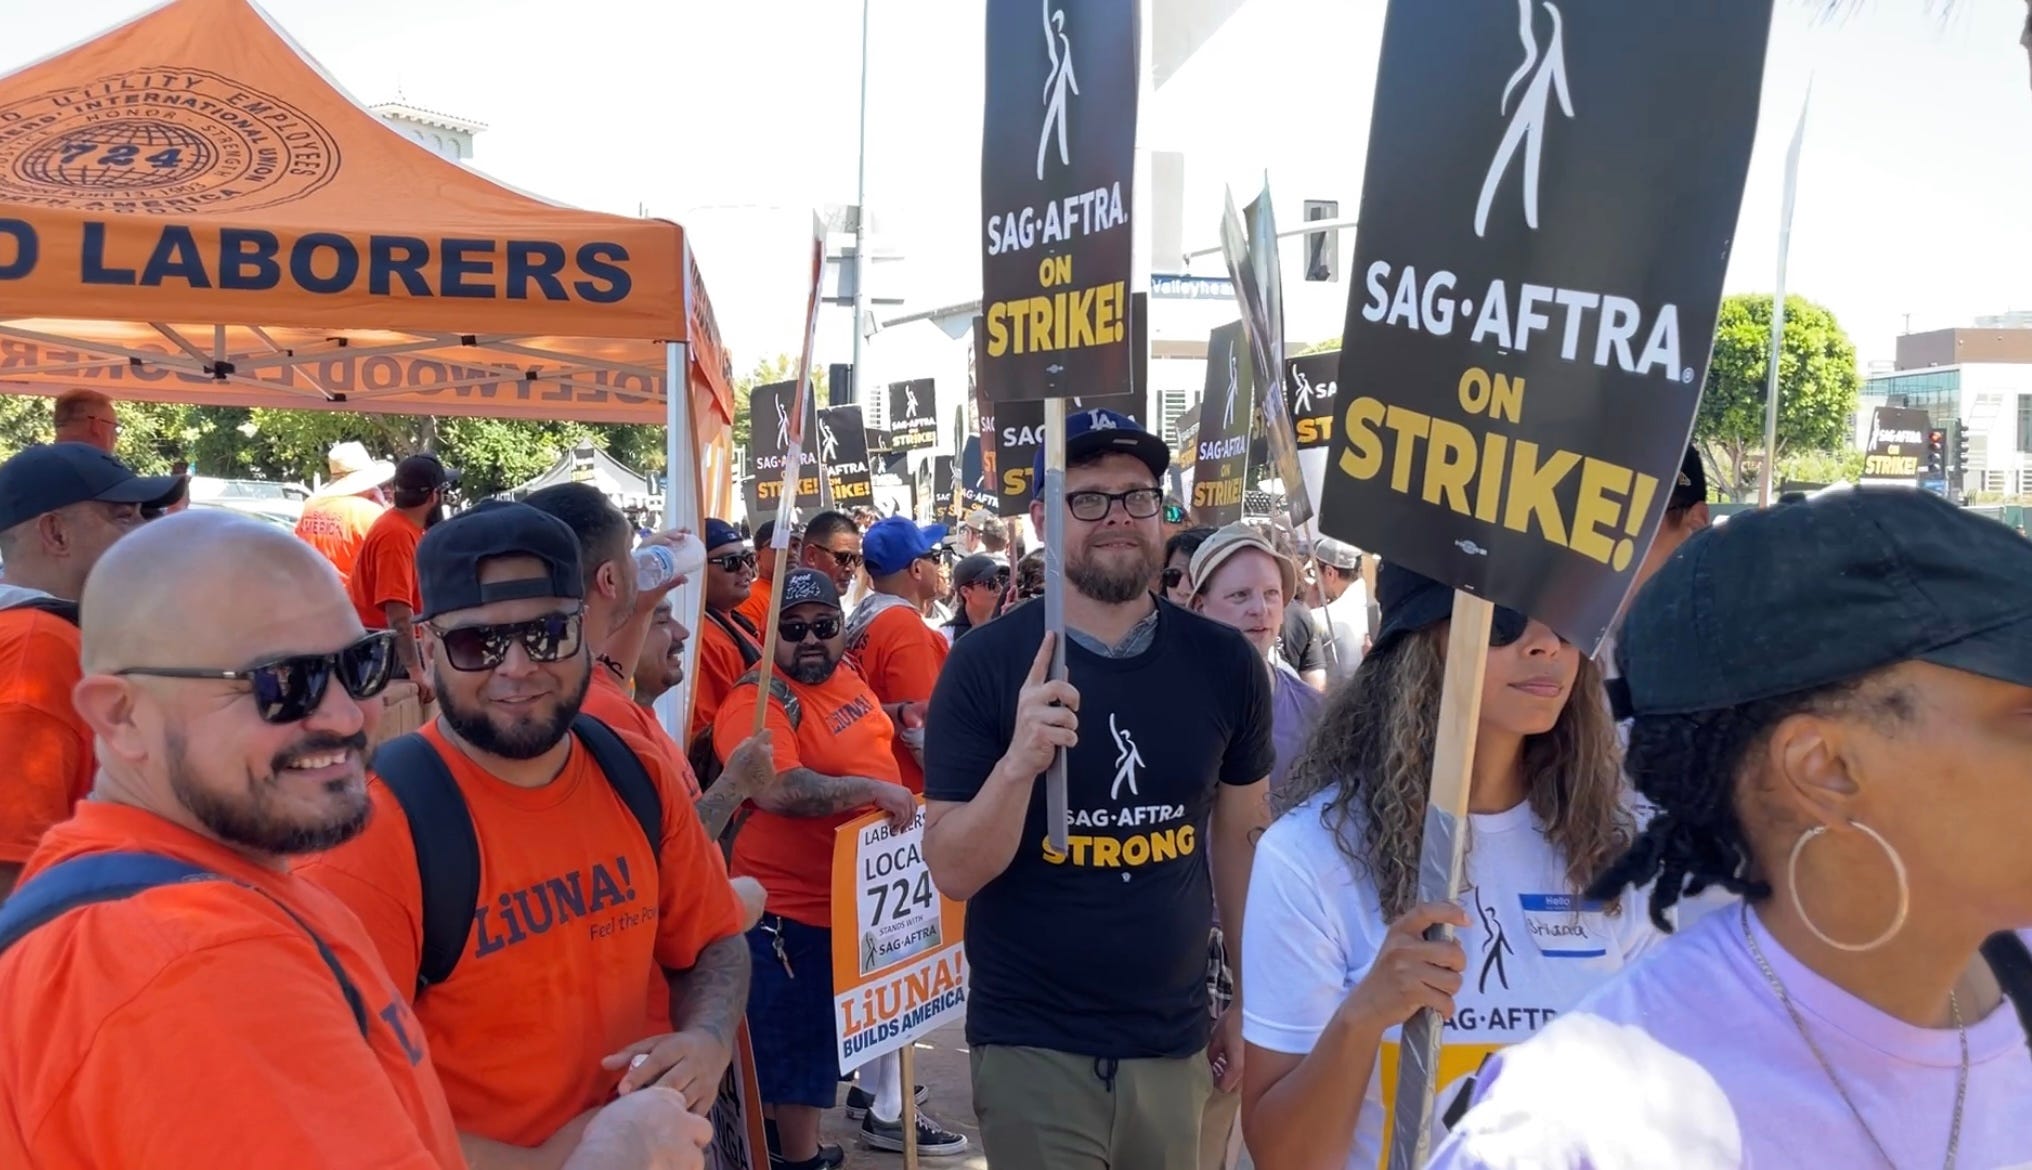 From UAW to WGA, here's why so many workers are on strike this year